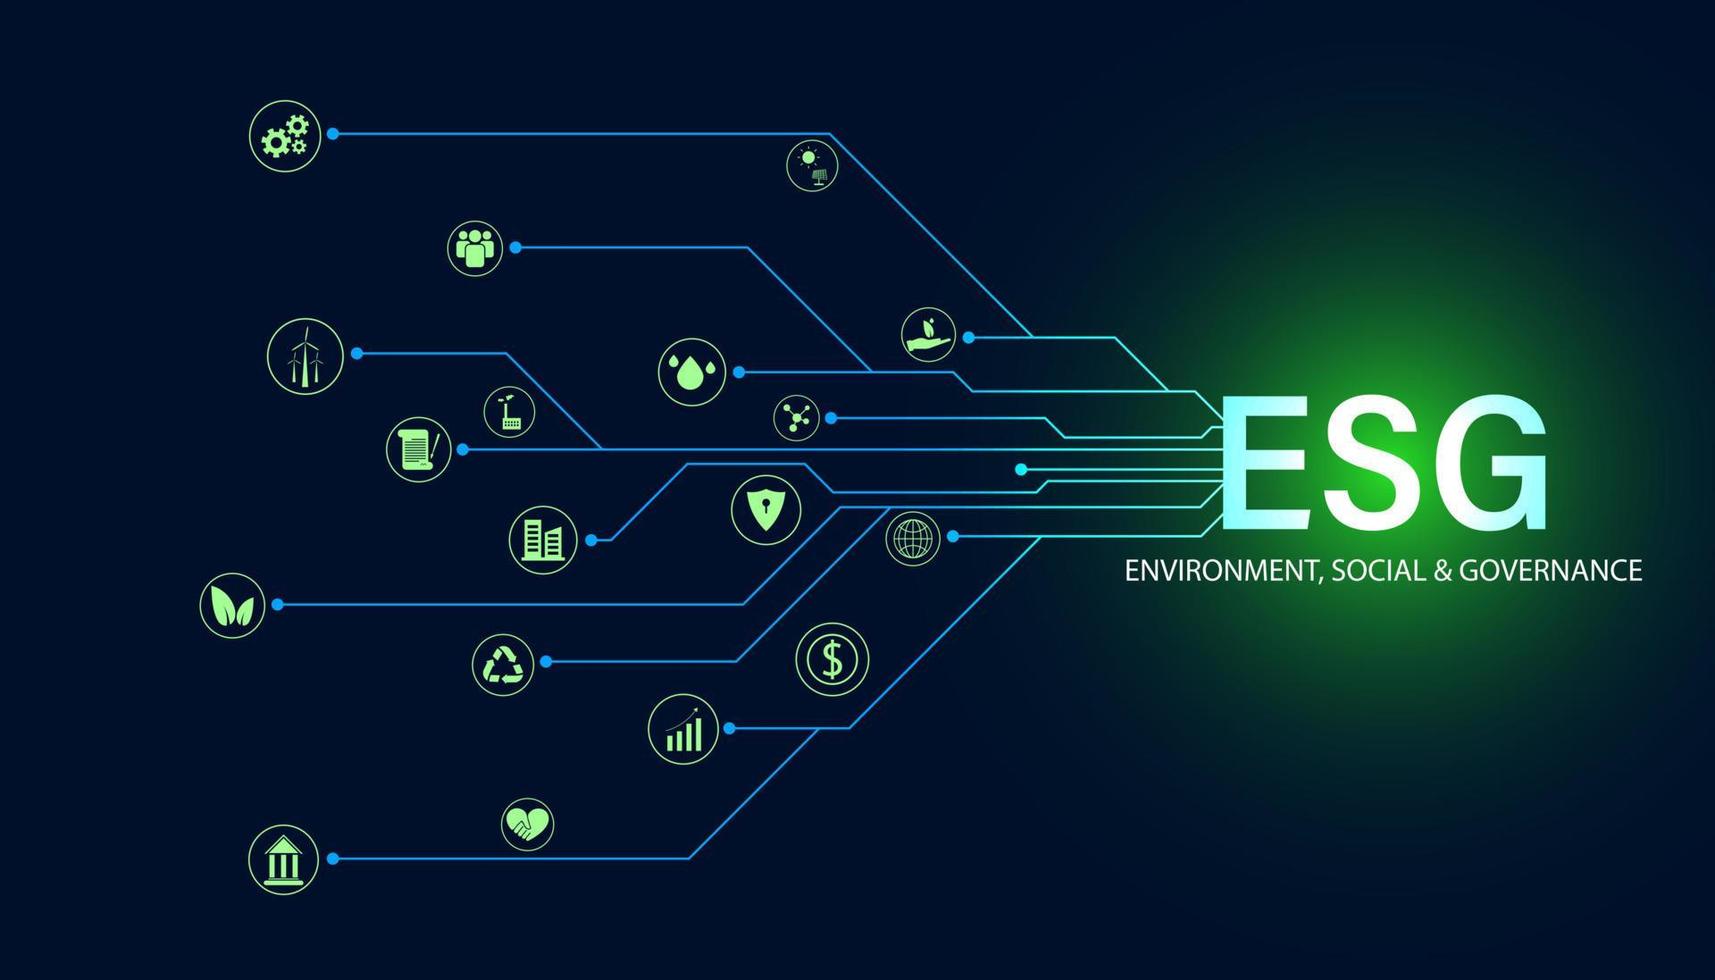 Abstract ESG with icon concept sustainable corporate development Environment, Social, and Governance on a modern green background. vector